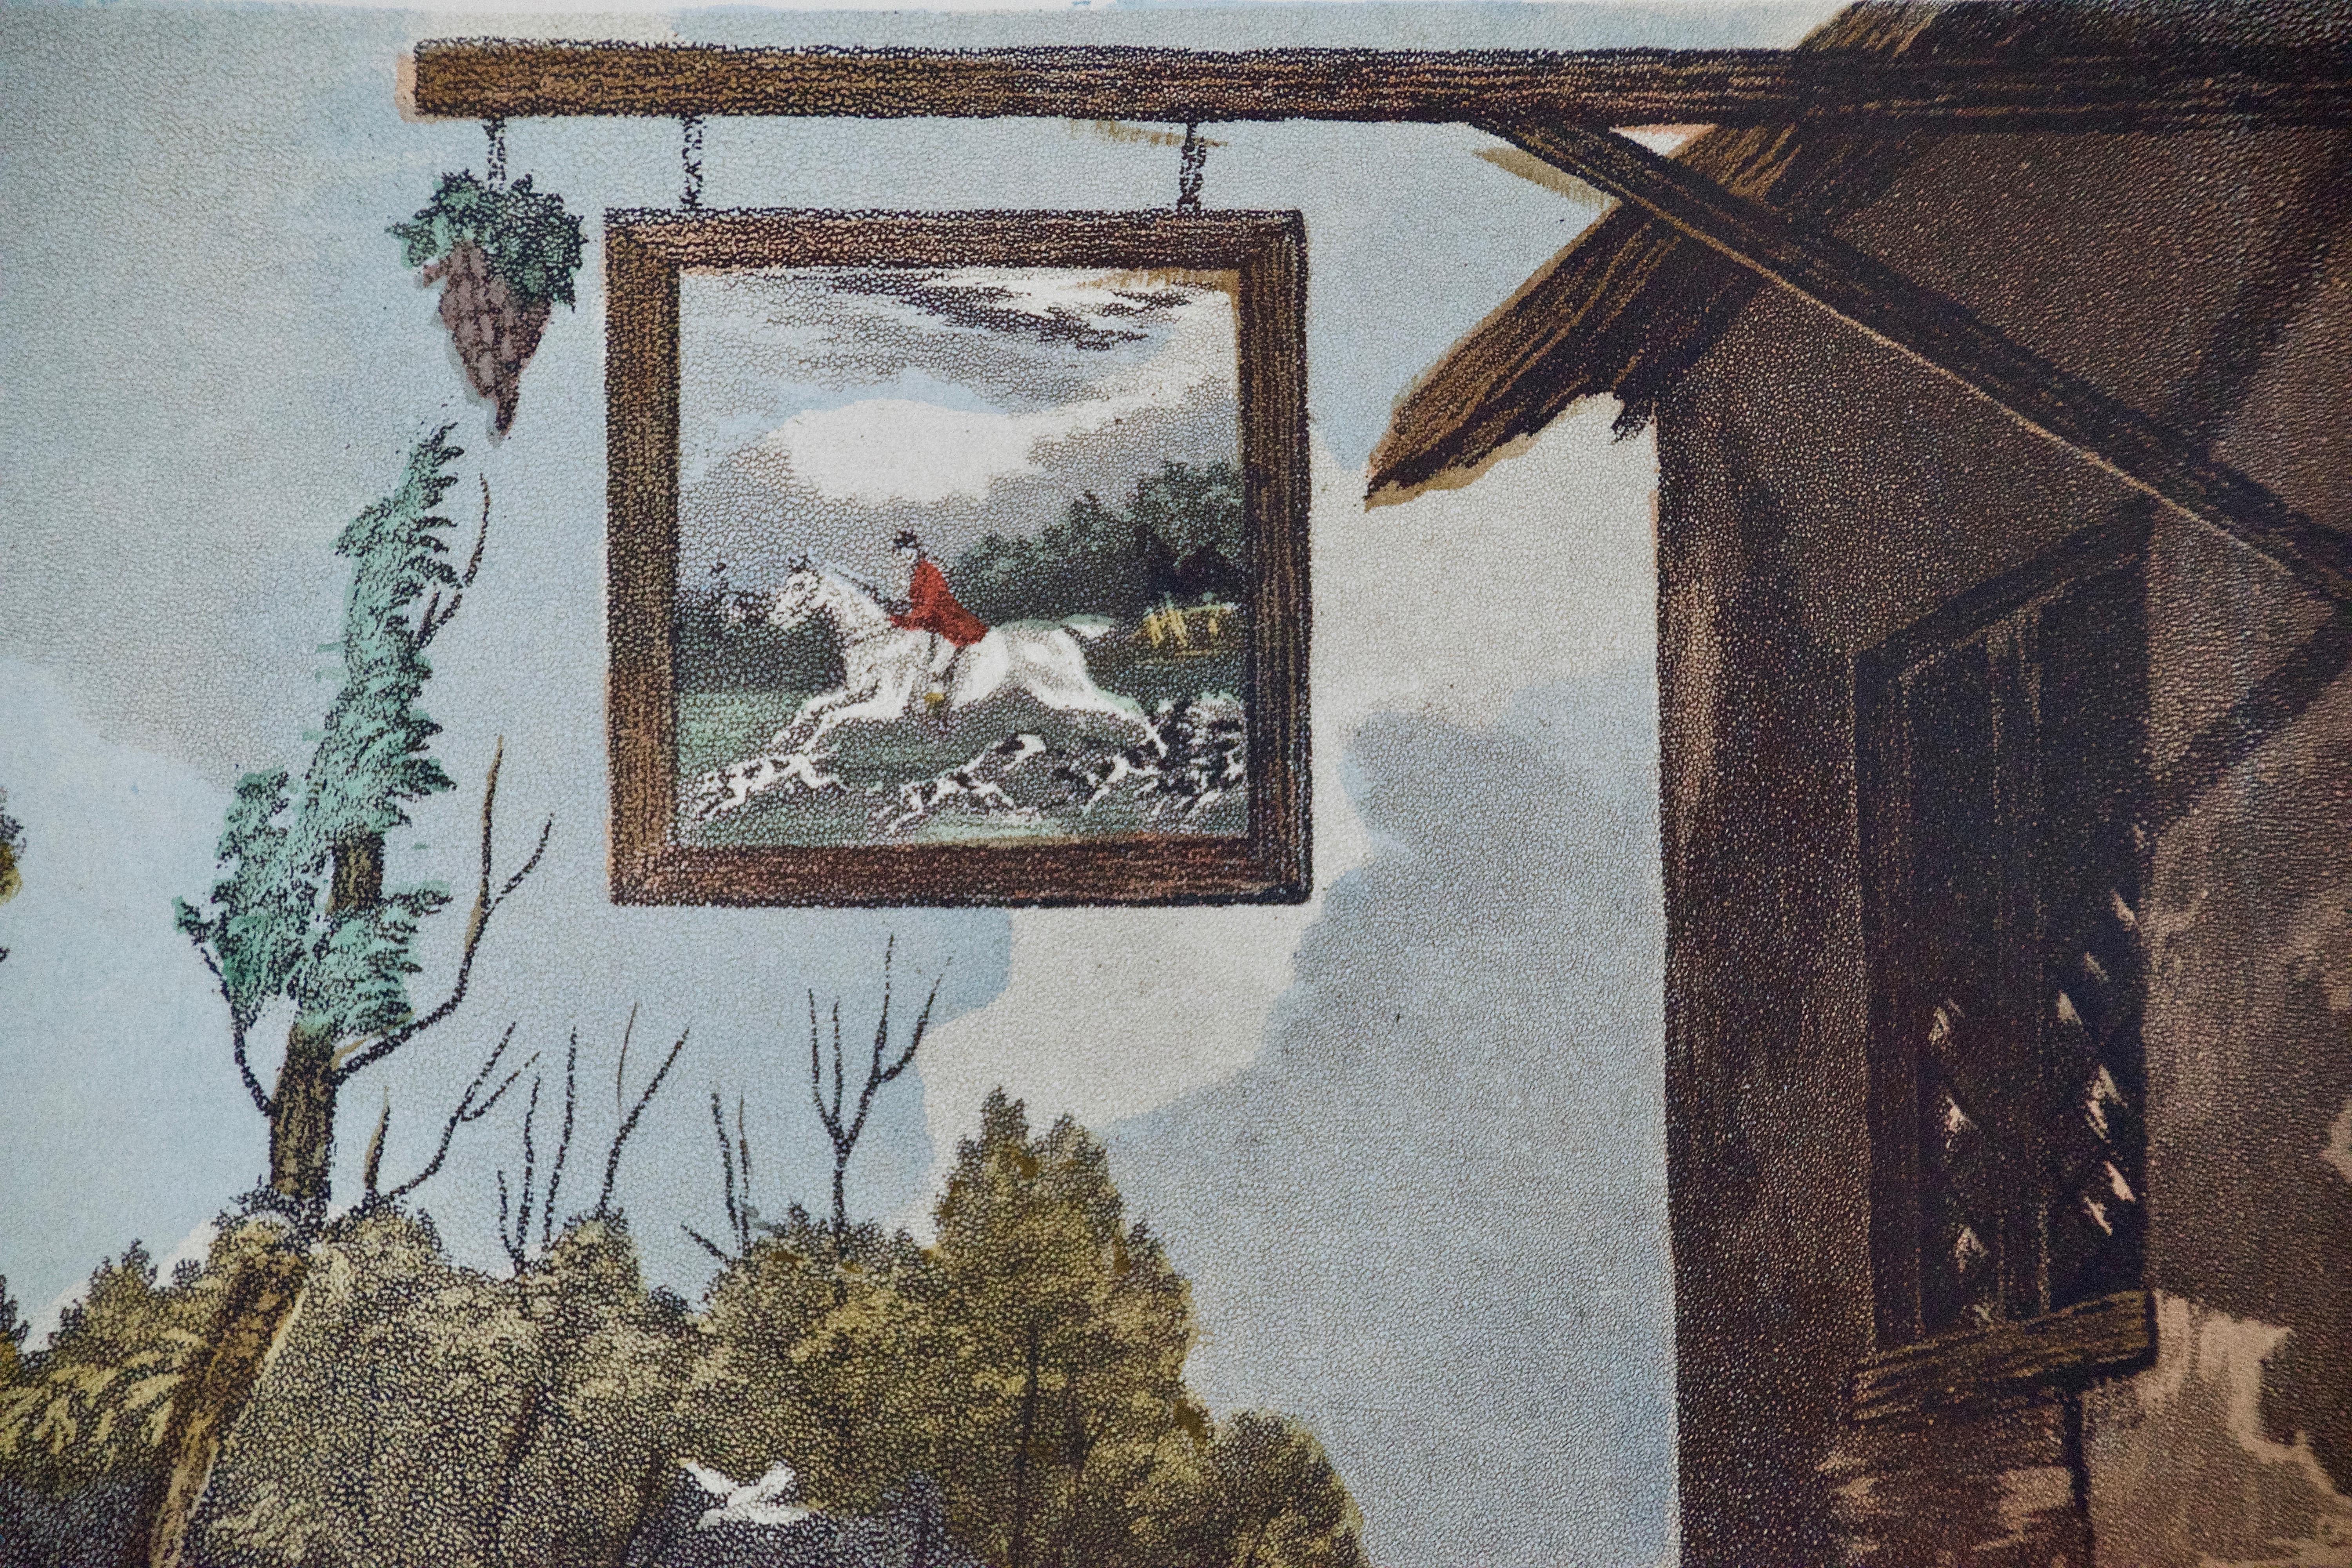 A Colored Lithograph of an Equestrian Hunting Scene, 